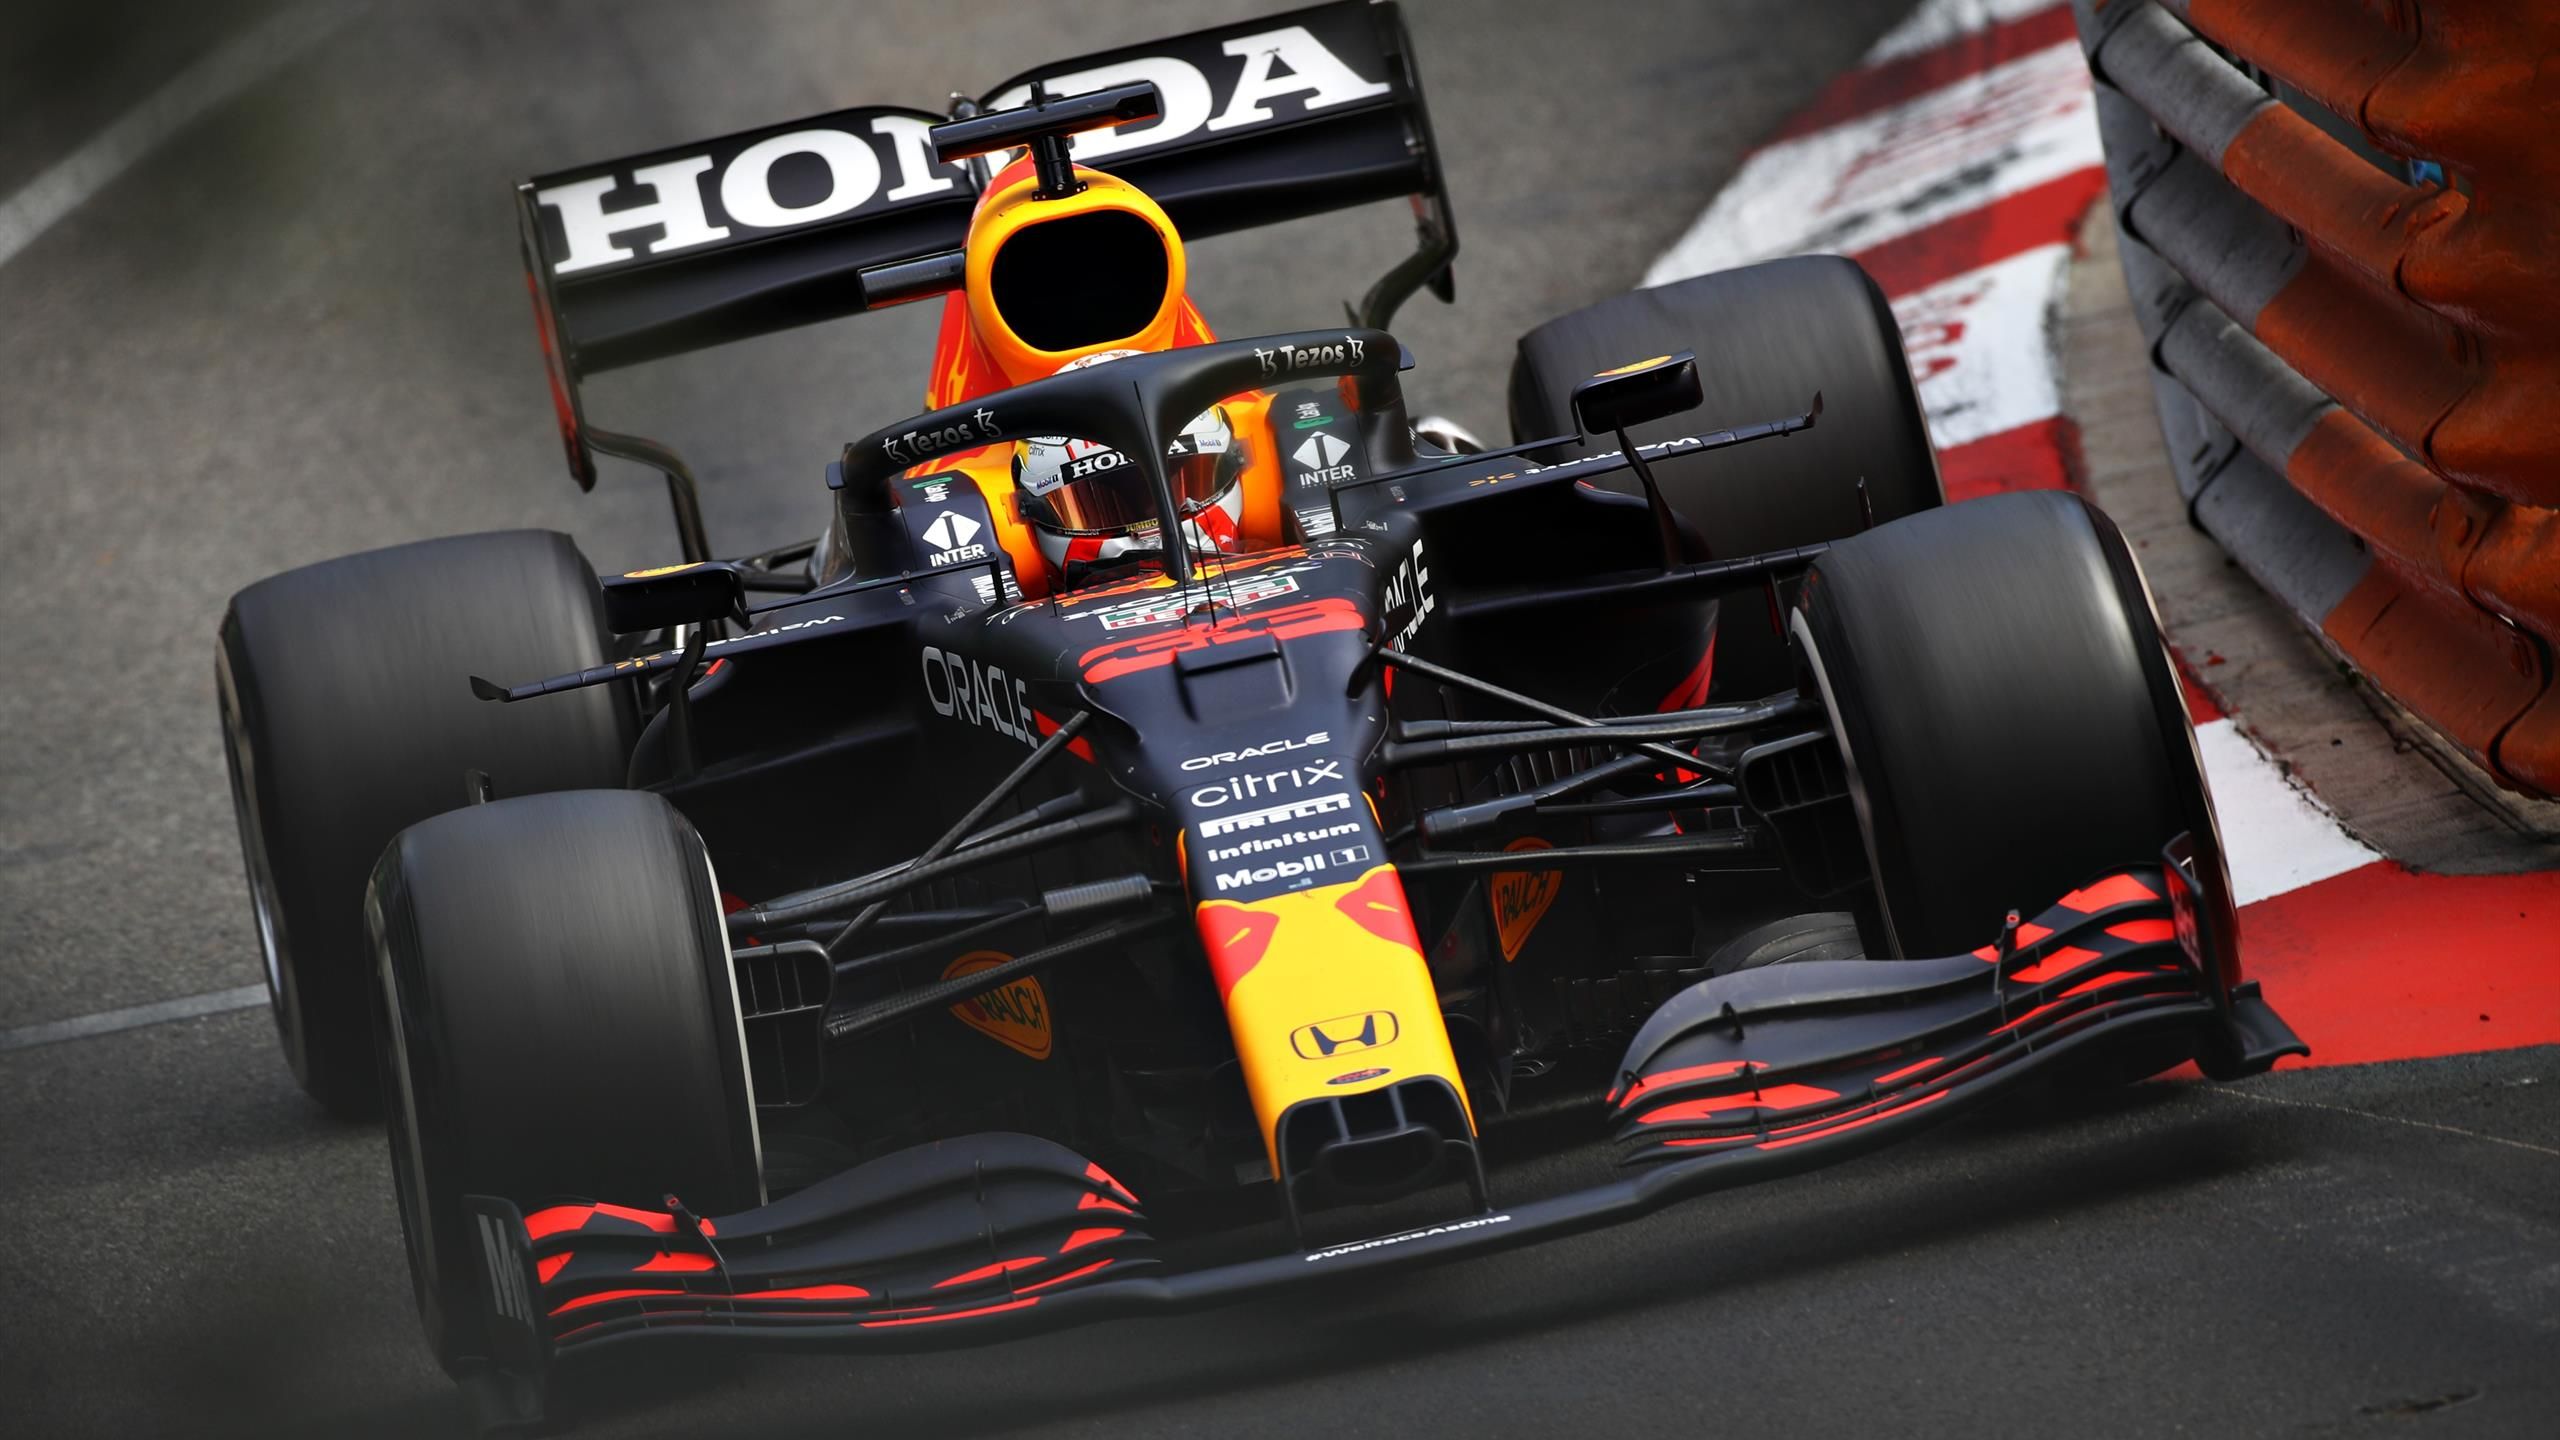 F1 Monaco Grand Prix 2021 - Red Bulls Max Verstappen storms to victory to take championship lead from Lewis Hamilton